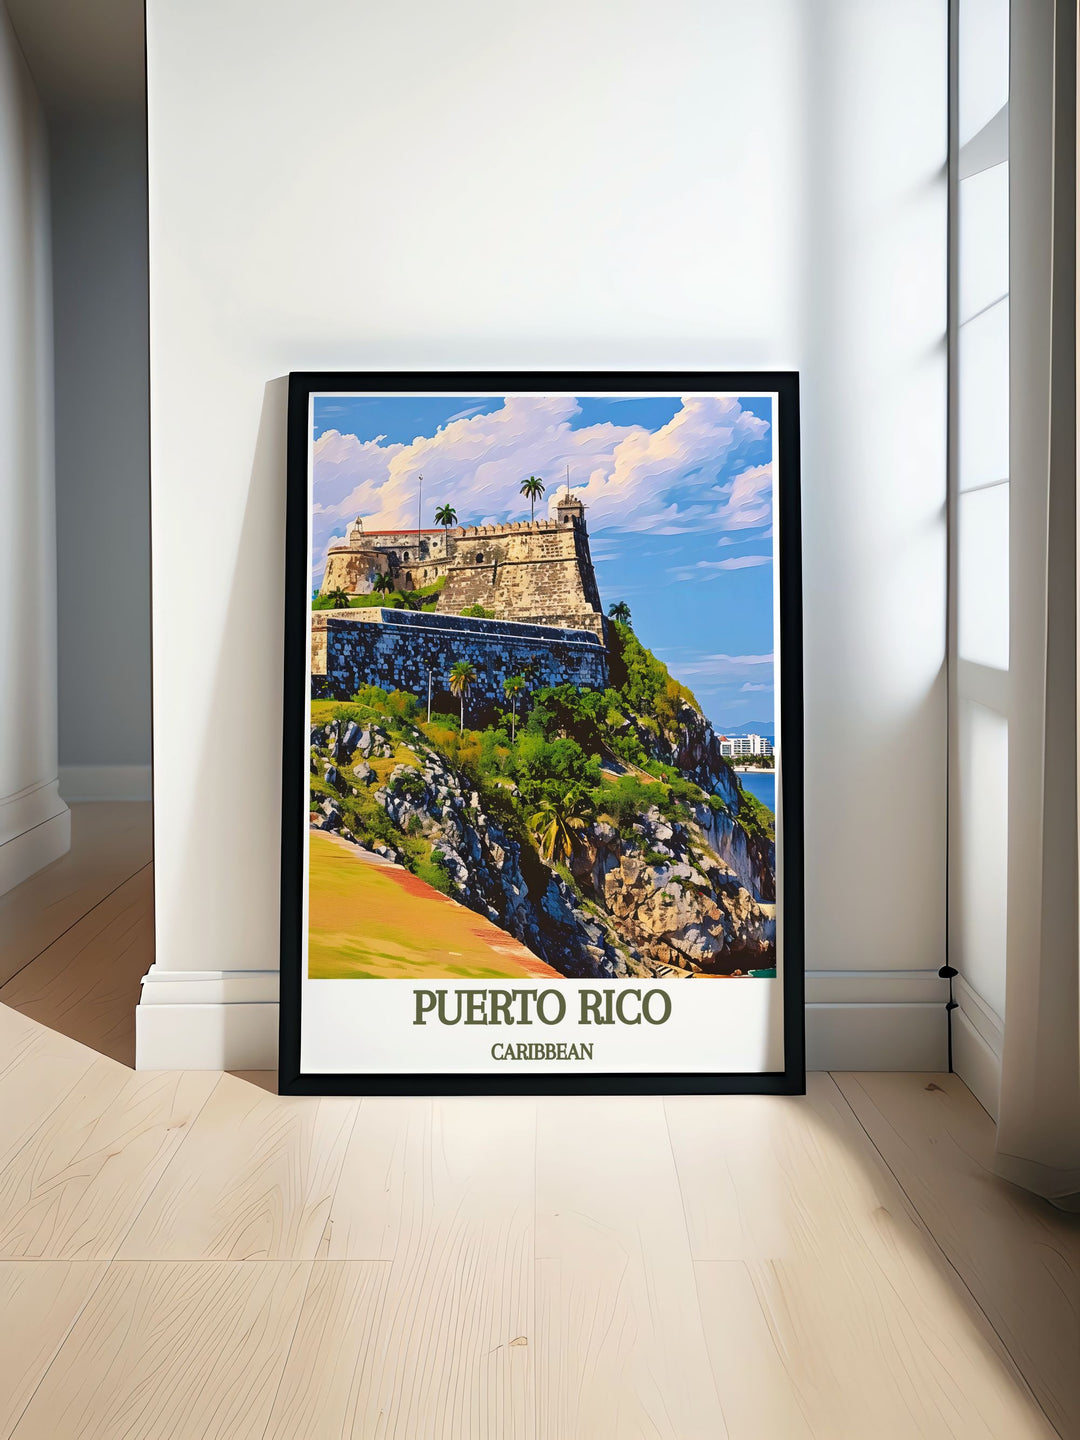 Stunning Puerto Rico poster featuring the iconic CARIBBEAN, Castillo San Felipe del Morro with vibrant colors perfect for home decor or gifts. Ideal for those who appreciate Arecibo artwork and travel poster prints with a vintage touch.